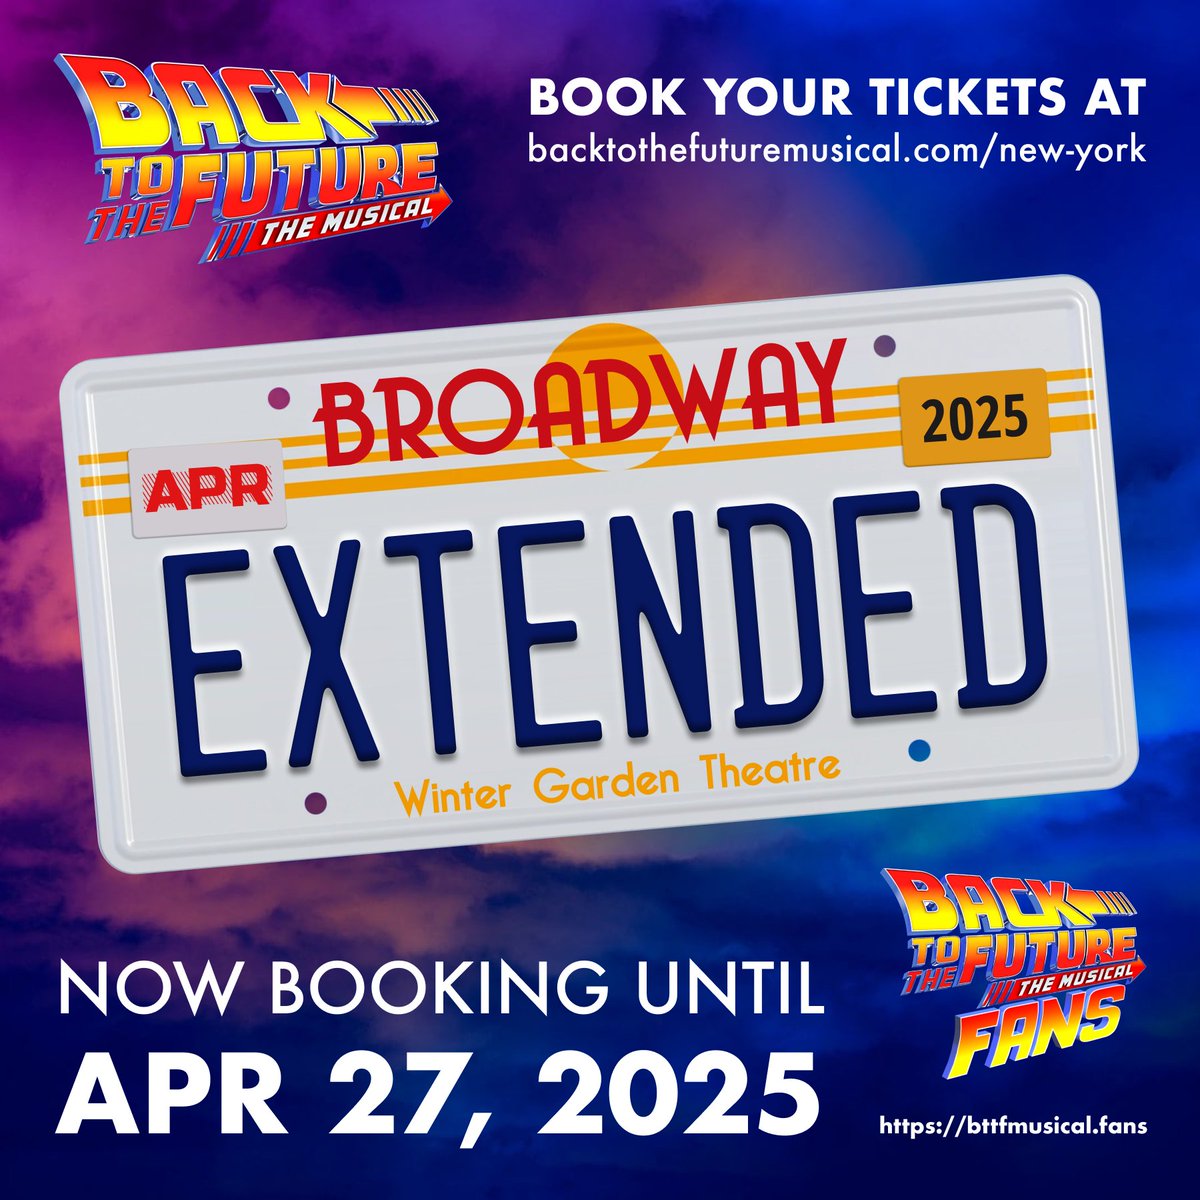 Unfortunately, you never know when or where it’s ever gonna strike! ⚡️

In case you missed it, @BTTFBway at the Winter Garden Theatre on #Broadway is now booking until April 27, 2025 💙

Get your tickets before you’re OUTATIME!

🎟 backtothefuturemusical.com/new-york

#bttfbway #bttfbroadway